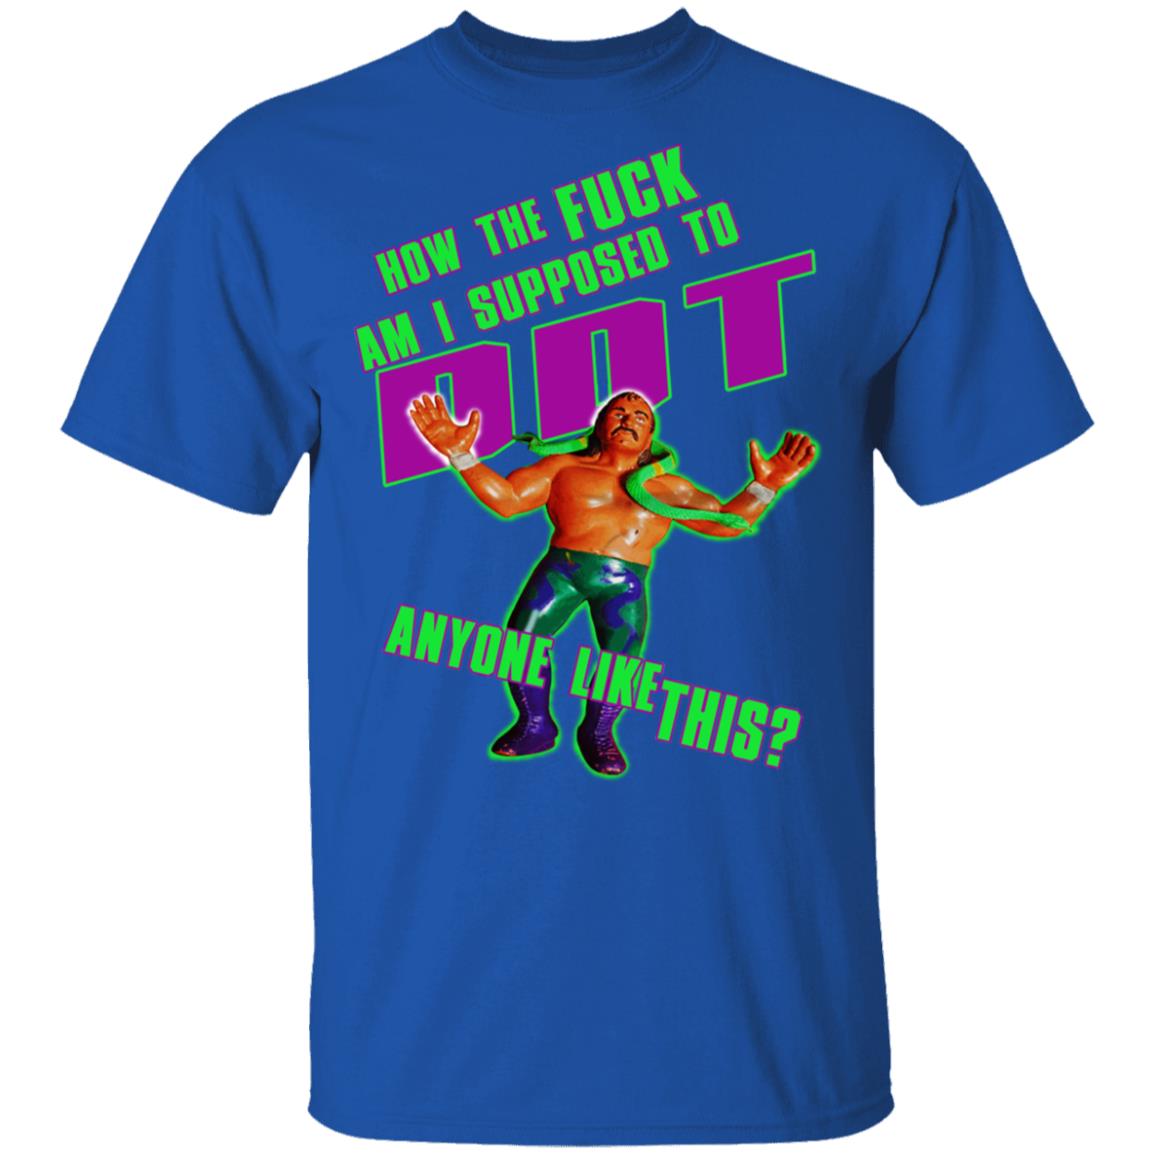 WWE Jake How To Fuck I Supposed To DDT T-Shirts | El Real Tex-Mex